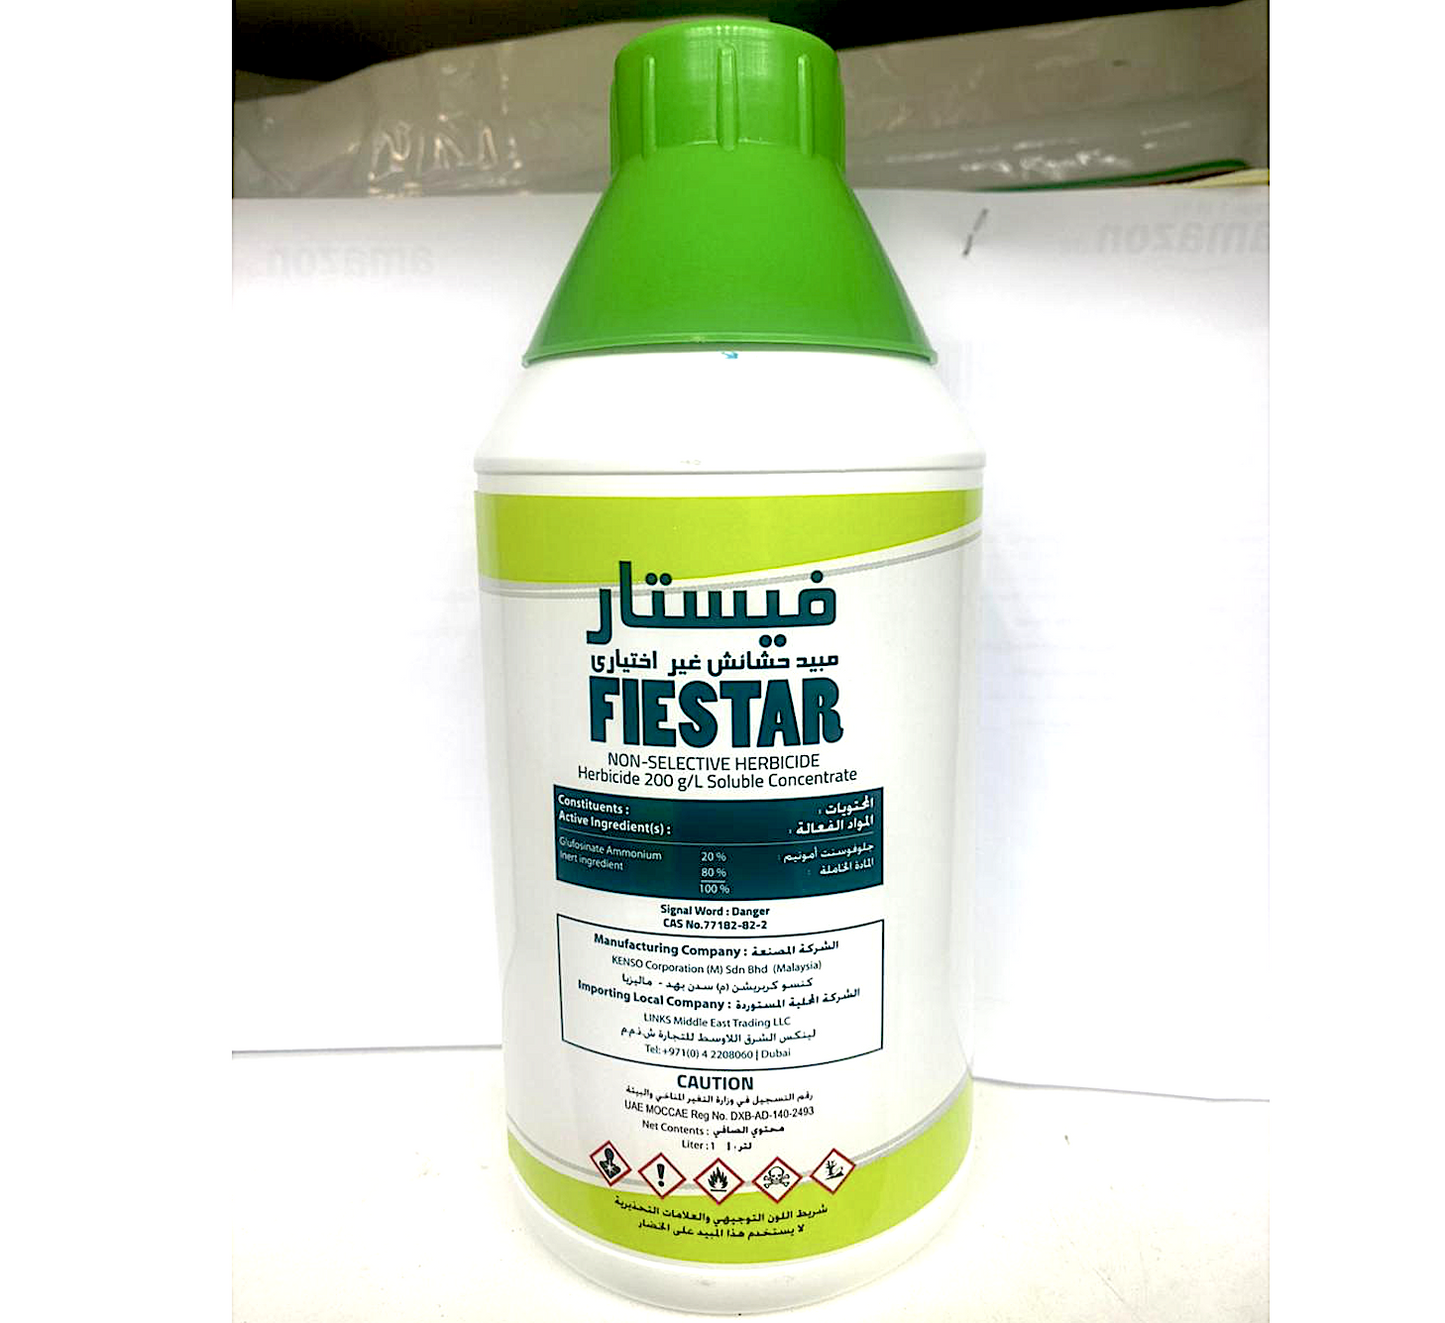 Fiestar Non-Selective Herbicide "To control Weeds/Unwanted plants" 1Ltr